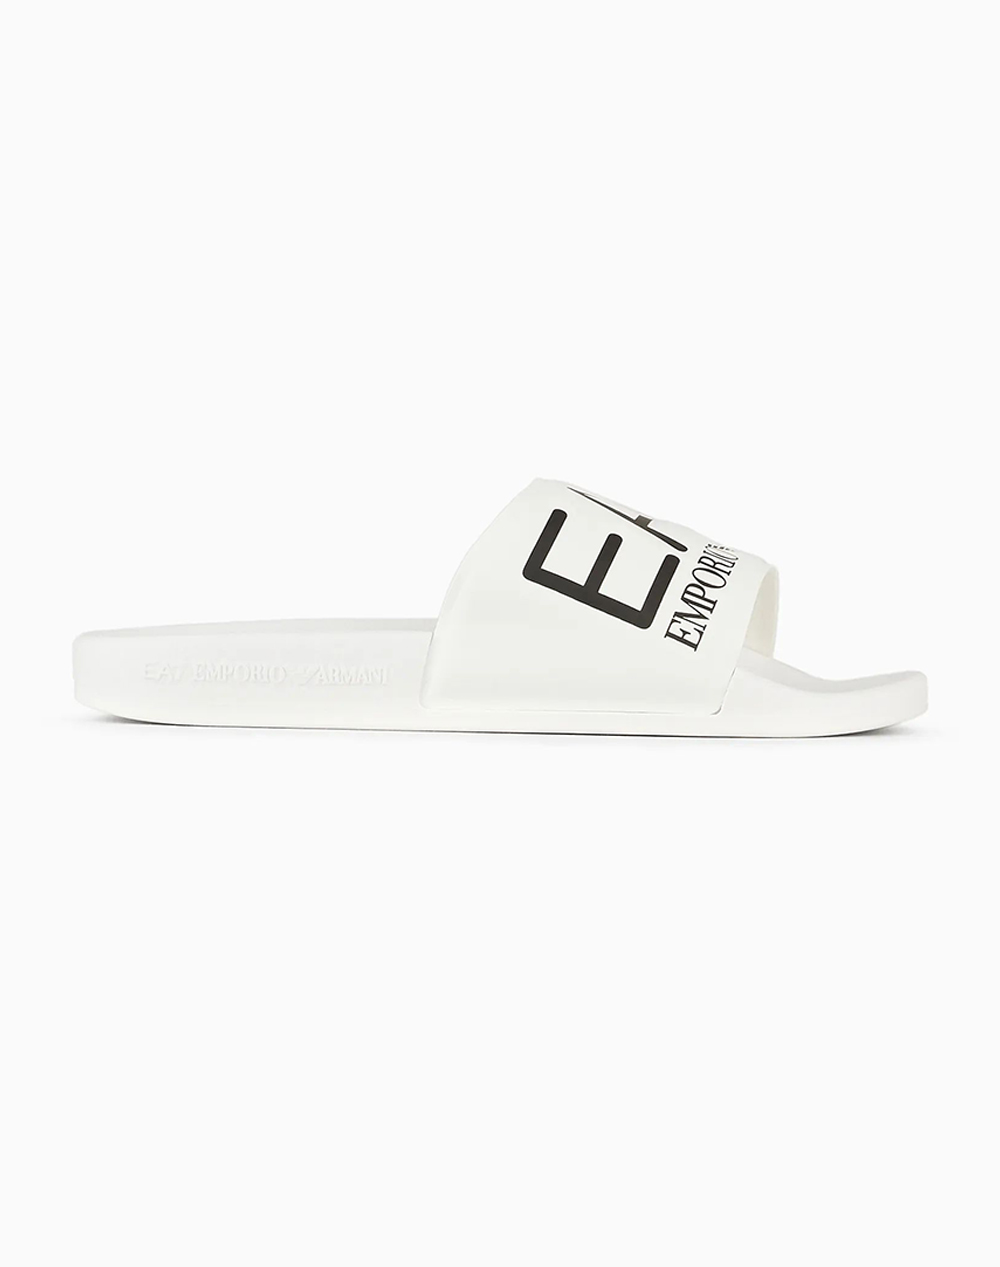 EA7 WATER SPORTS VISIBIL XCP001XCC22-00001 White